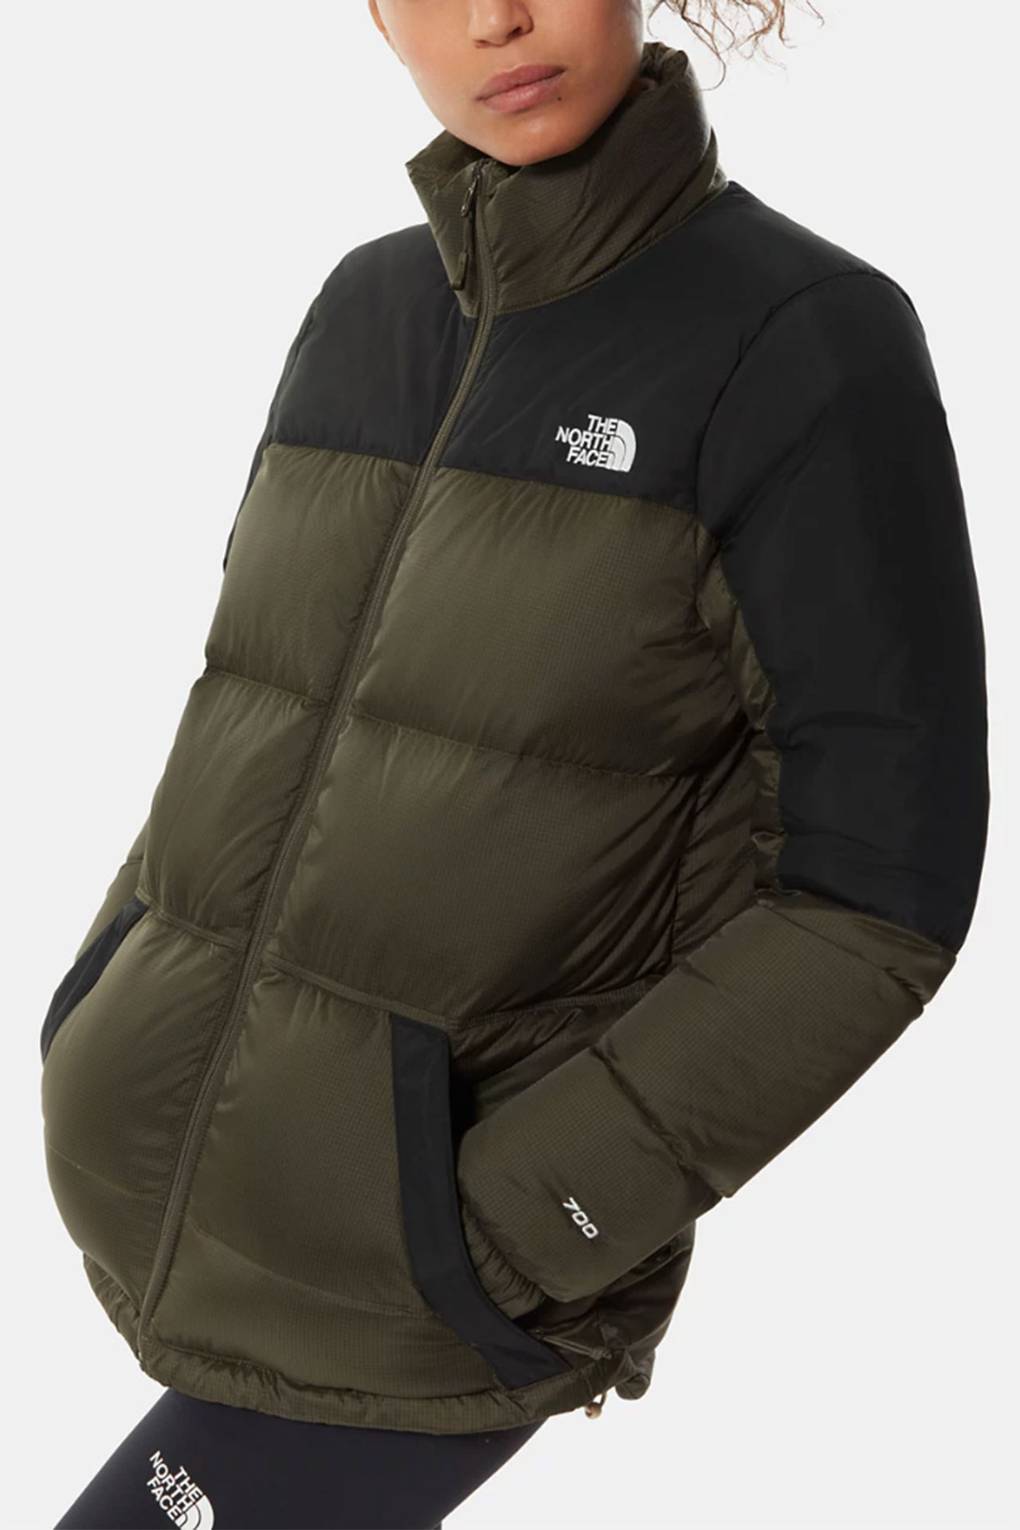 most popular north face jacket college